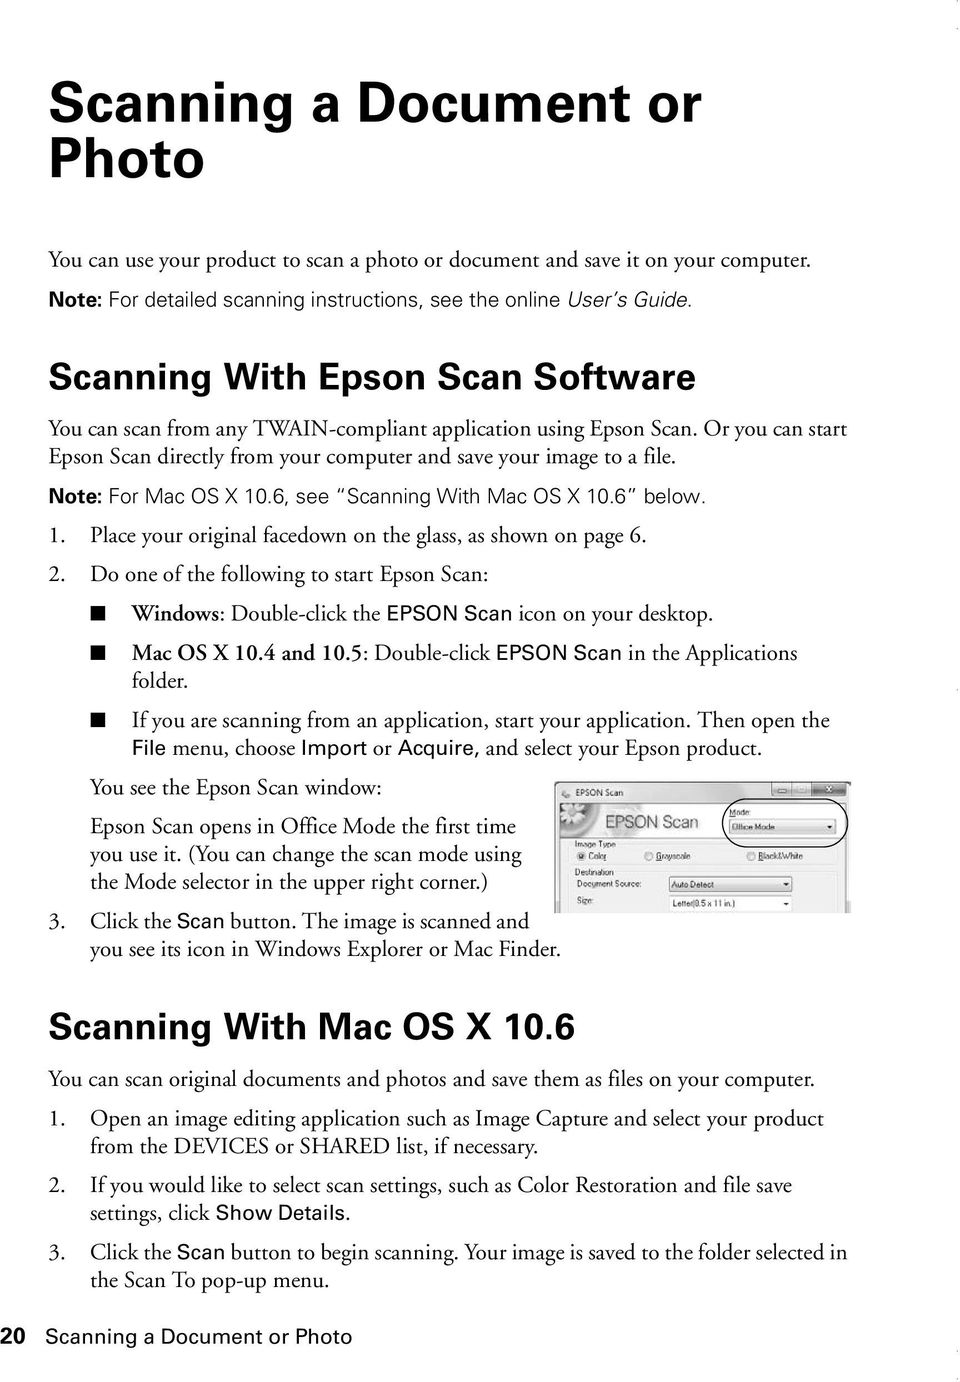 Note: For Mac OS X 10.6, see Scanning With Mac OS X 10.6 below. 1. Place your original facedown on the glass, as shown on page 6. 2.